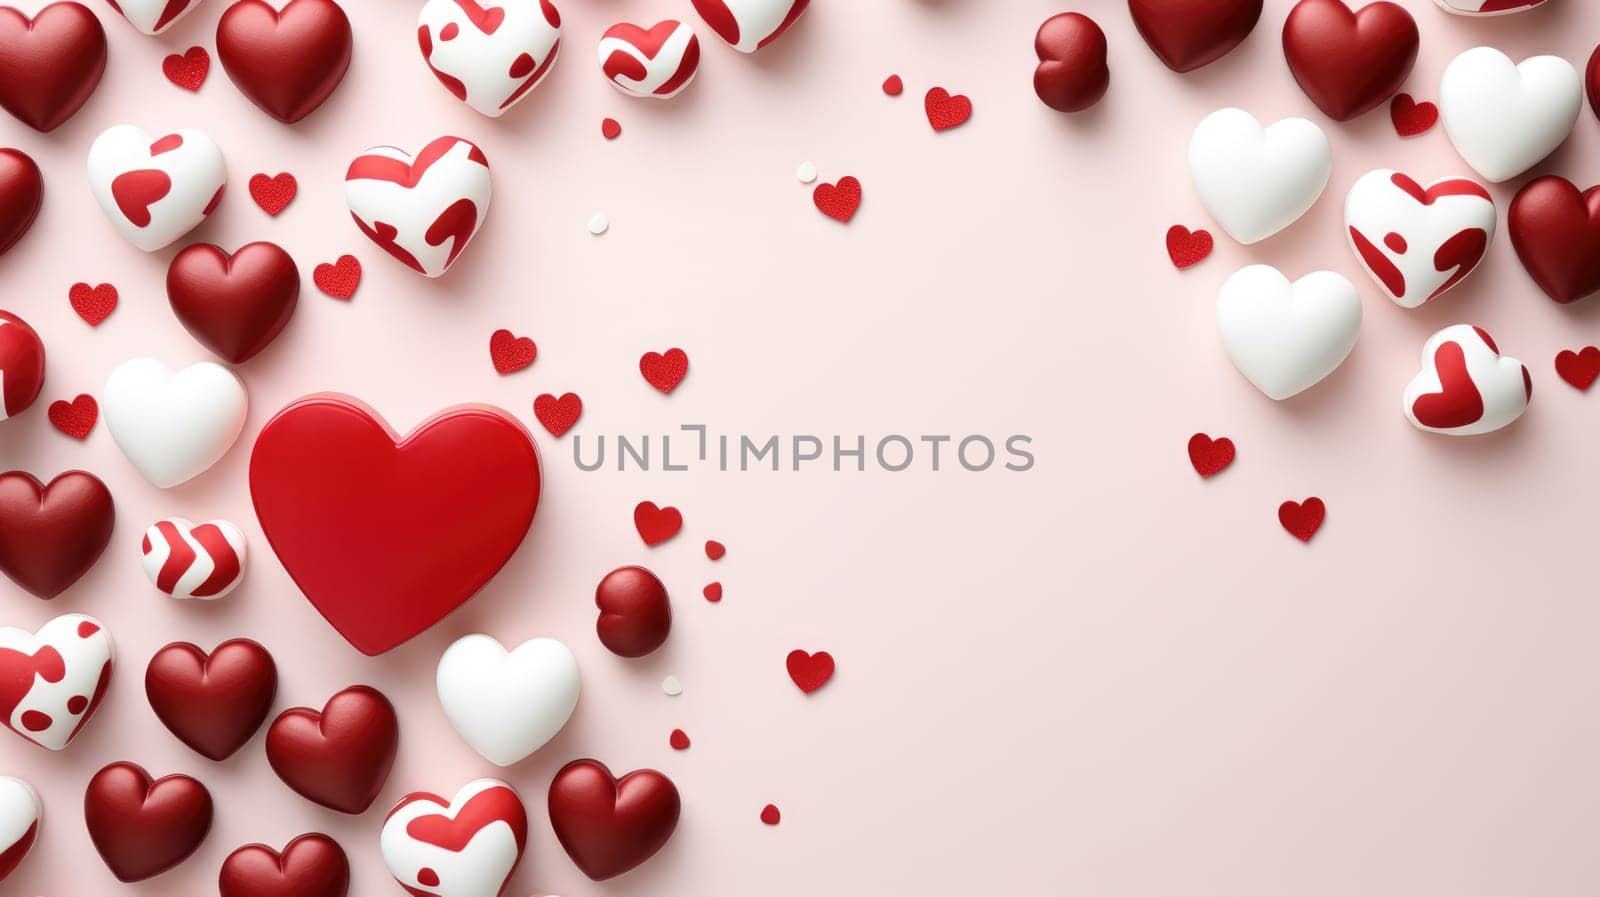 Valentines day heart shaped sweets on red background. Top view with copy space